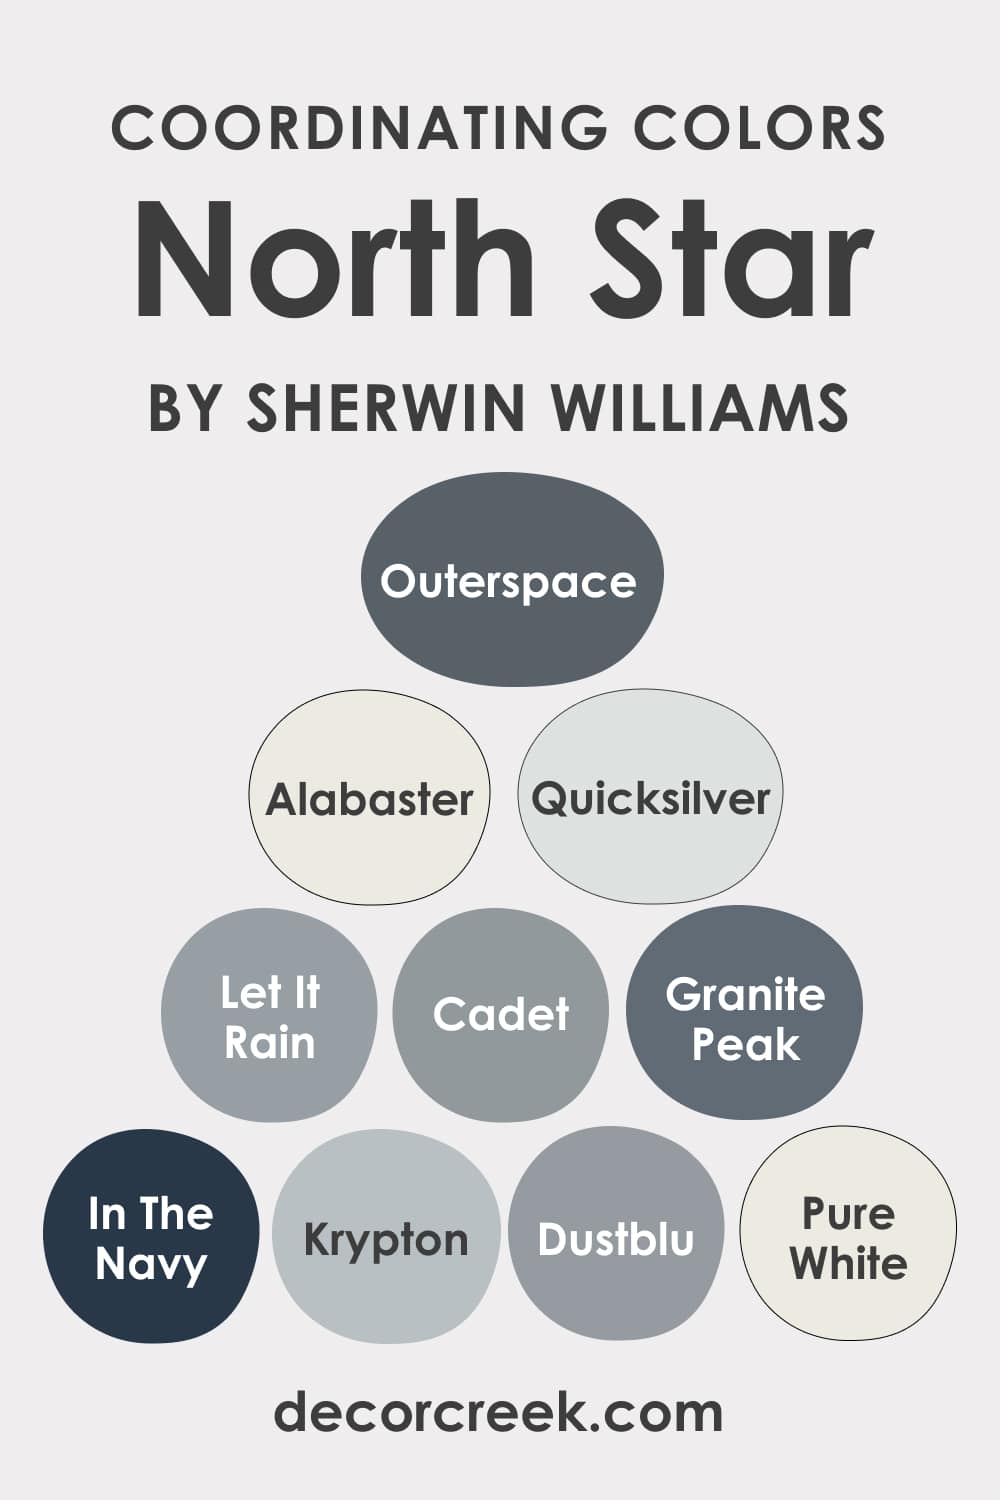 What Coordinating Colors Does SW North Star Color Have?